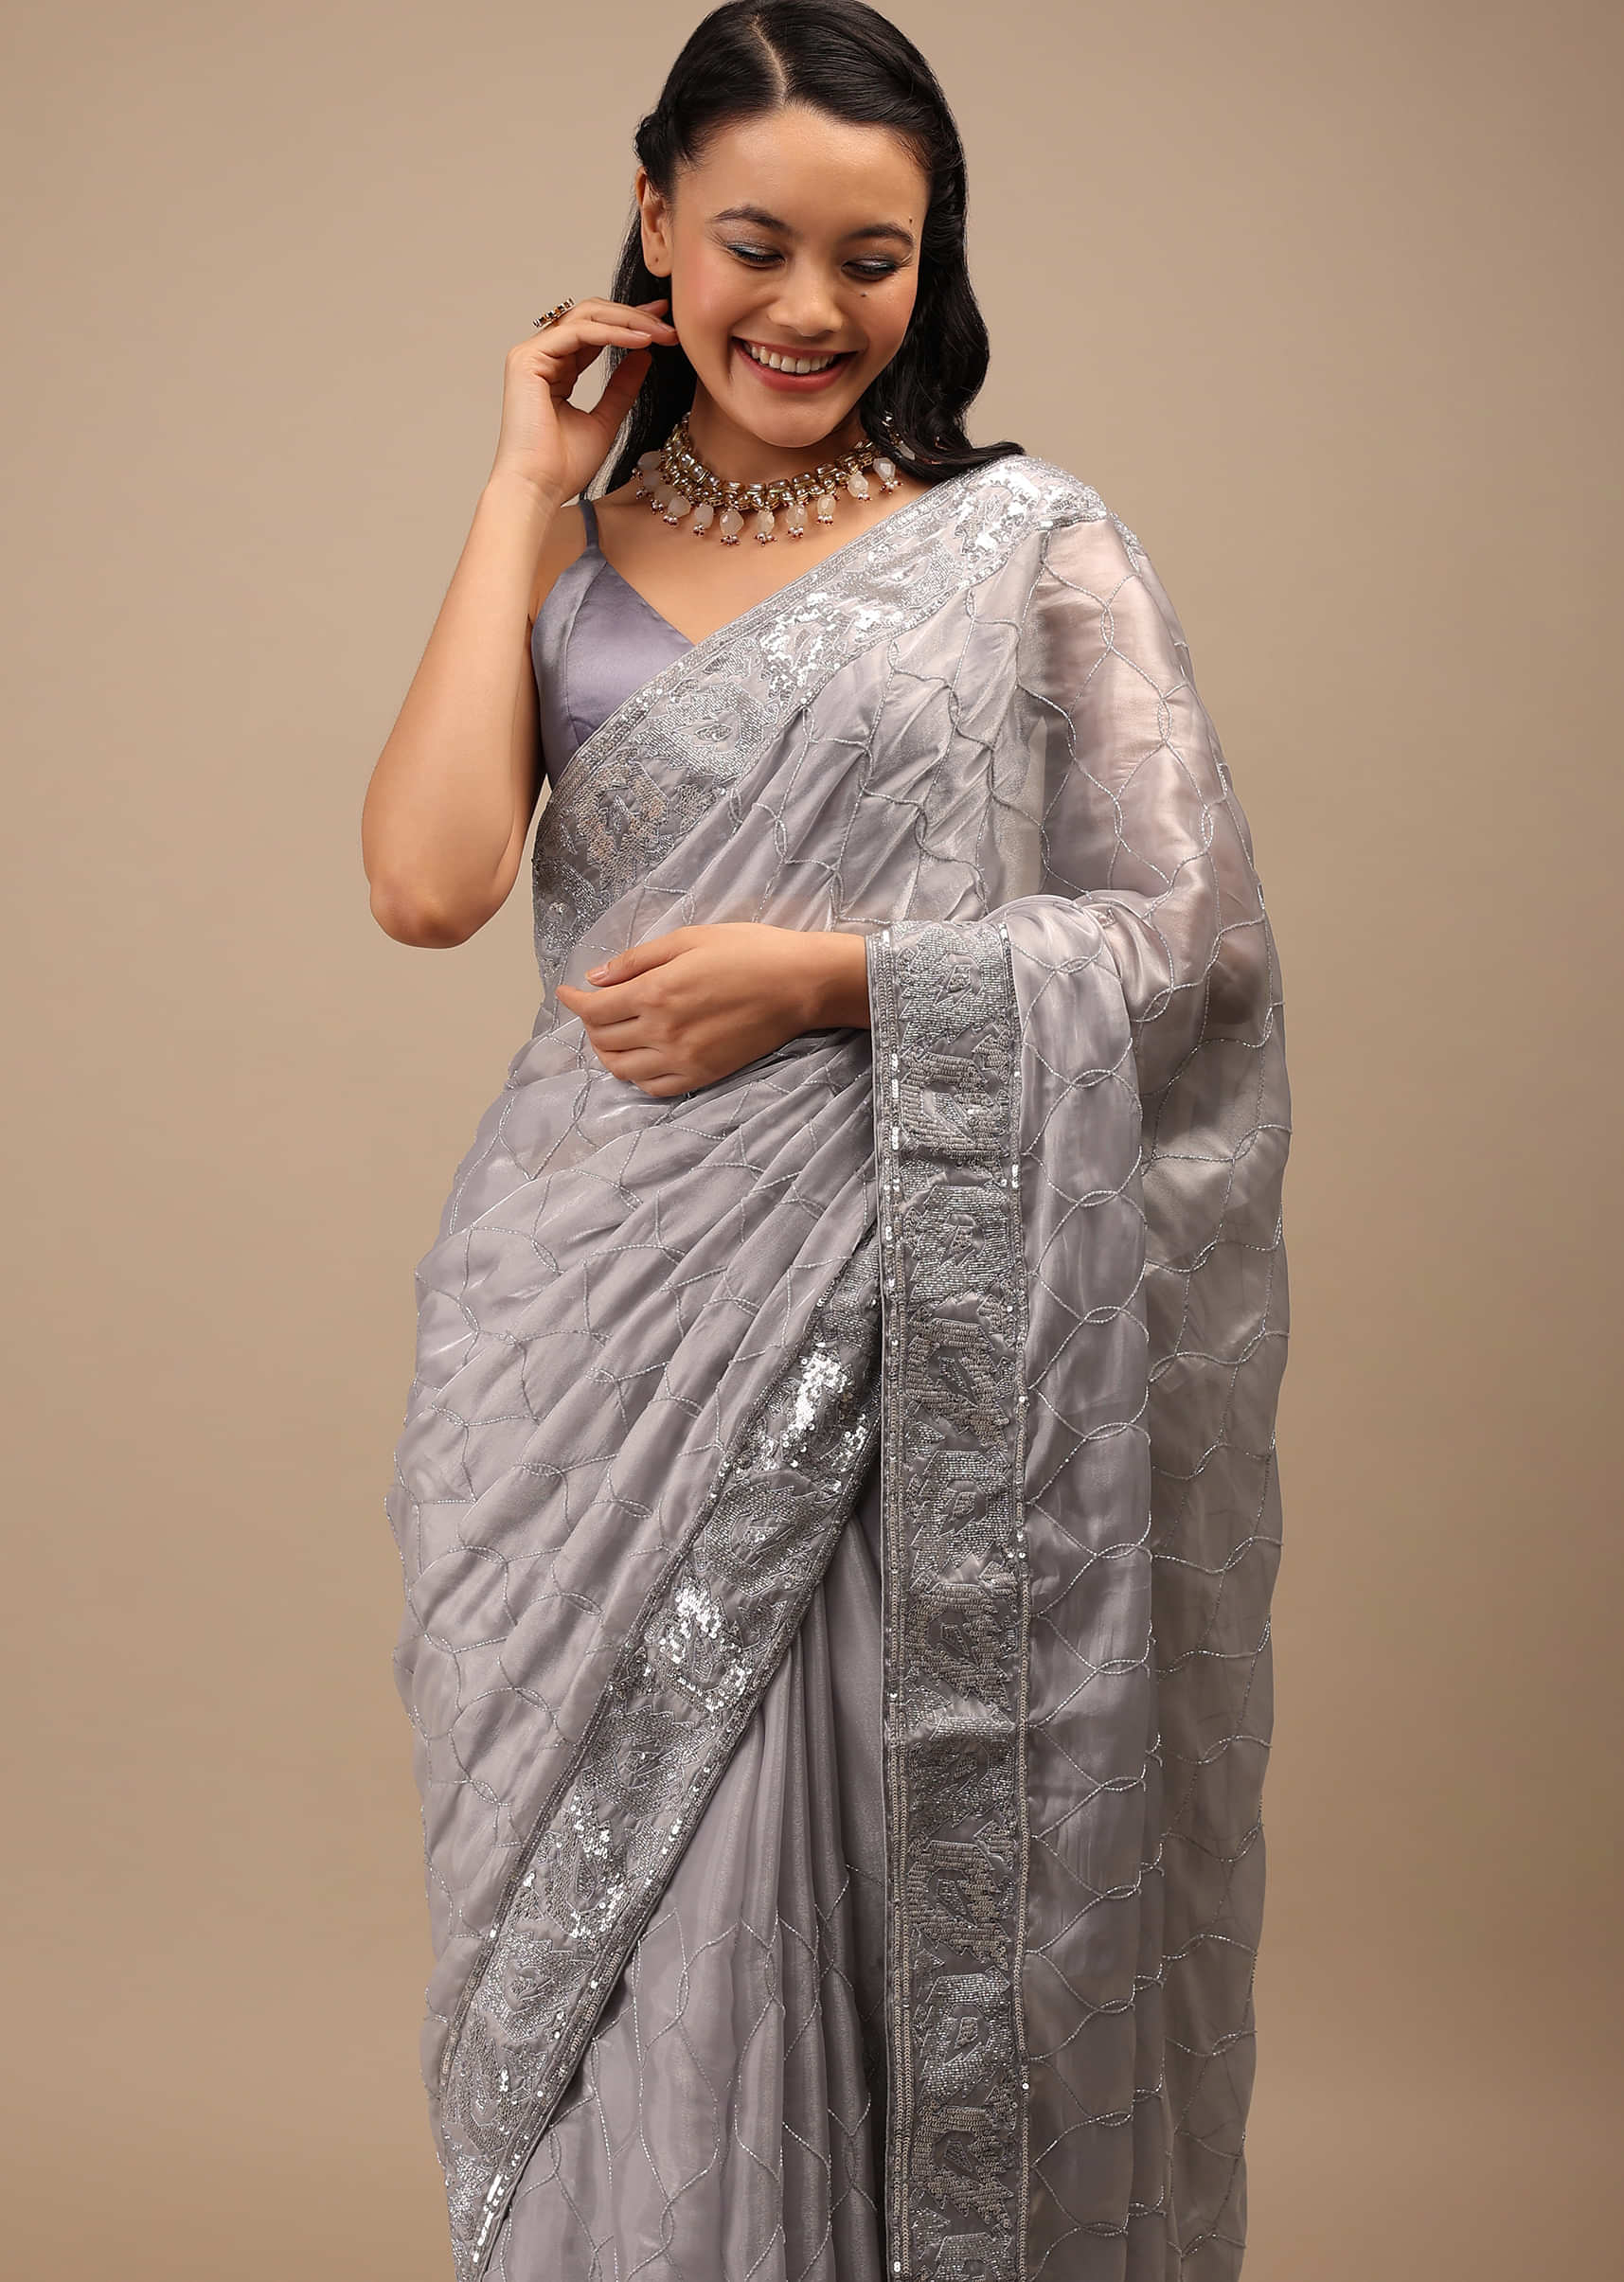 Lilac Grey Tissue Saree In Cut Dana Embroidery In A Moroccan Jaal, The Border Has Resham Work And Moti Tassel Embroidery